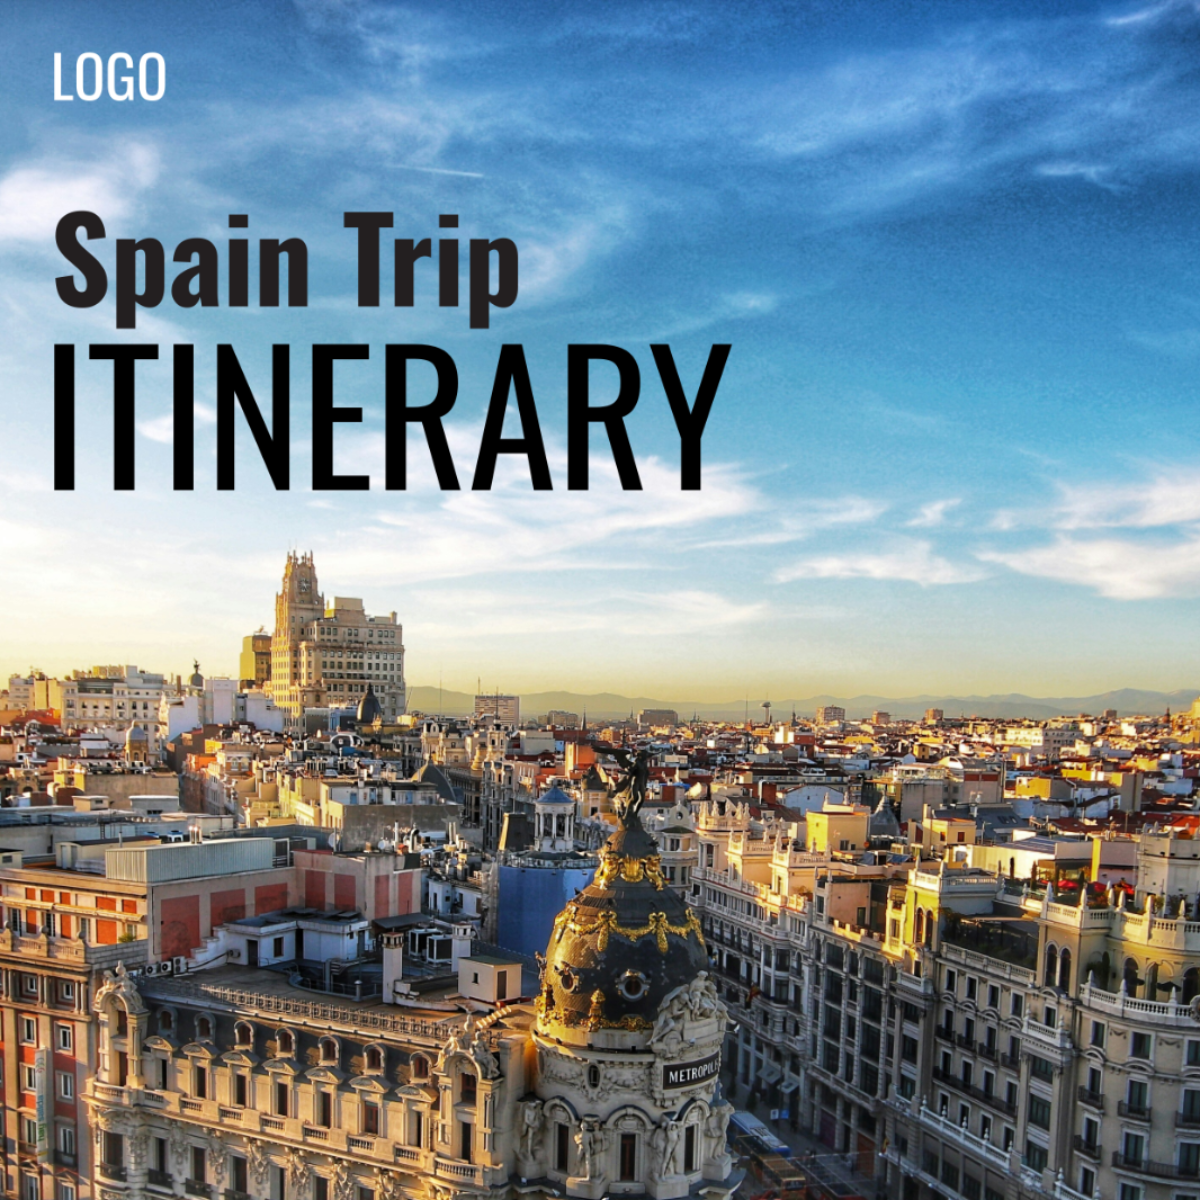 Spain Trip Itinerary Template